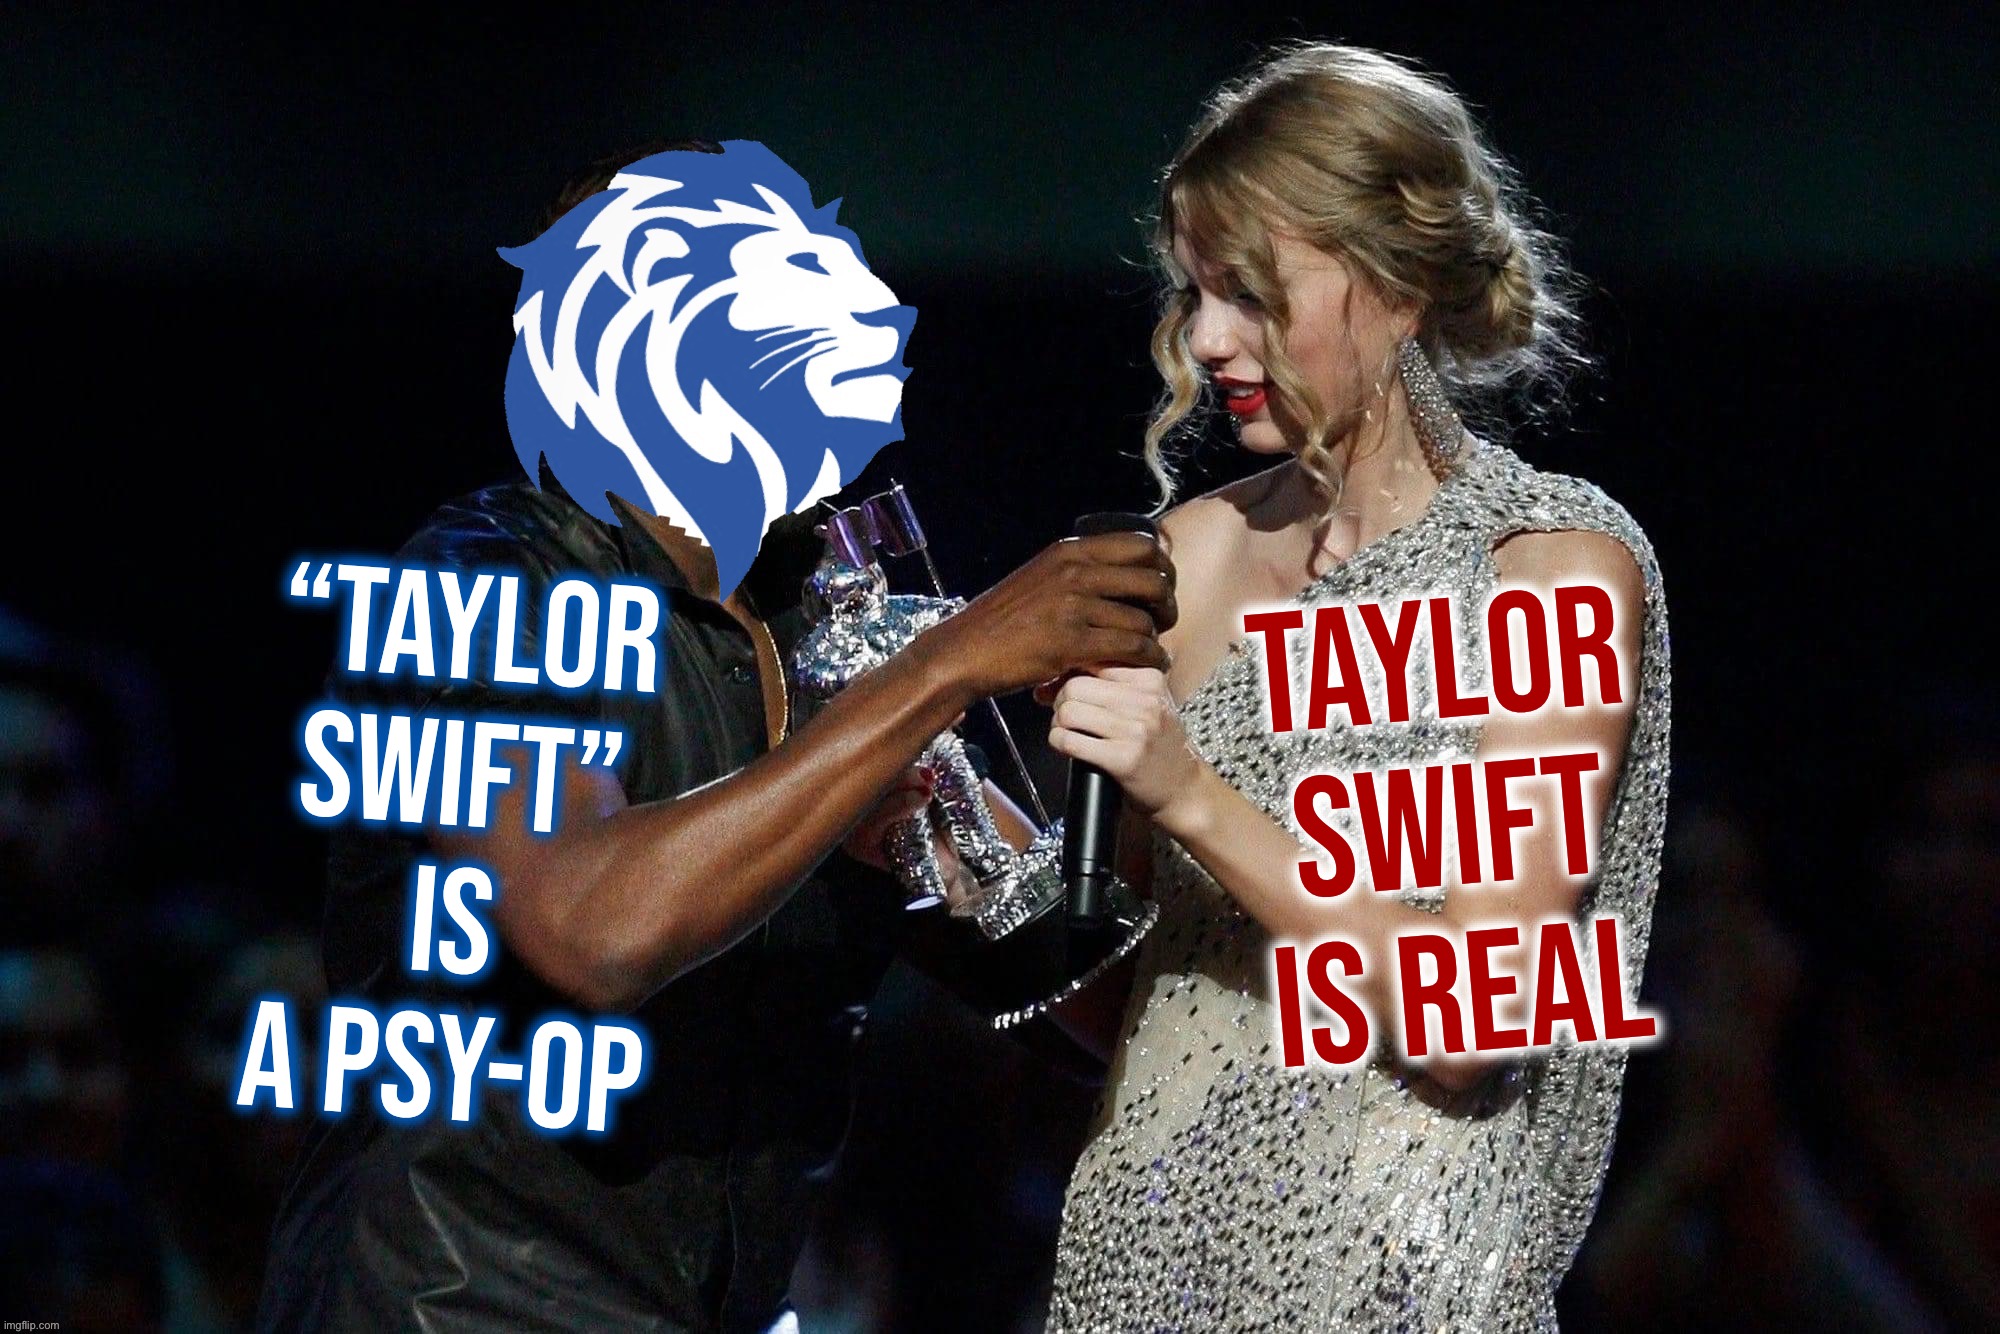 Ah yes. Taylor Swift: totally-real singer-songwriter, who definitely isn’t a fabrication of a dying record industry. #wink #wink | “Taylor Swift” is a psy-op; Taylor Swift is real | image tagged in conservative party steals microphone from taylor swift,taylor,swift,is,a,psy-op | made w/ Imgflip meme maker